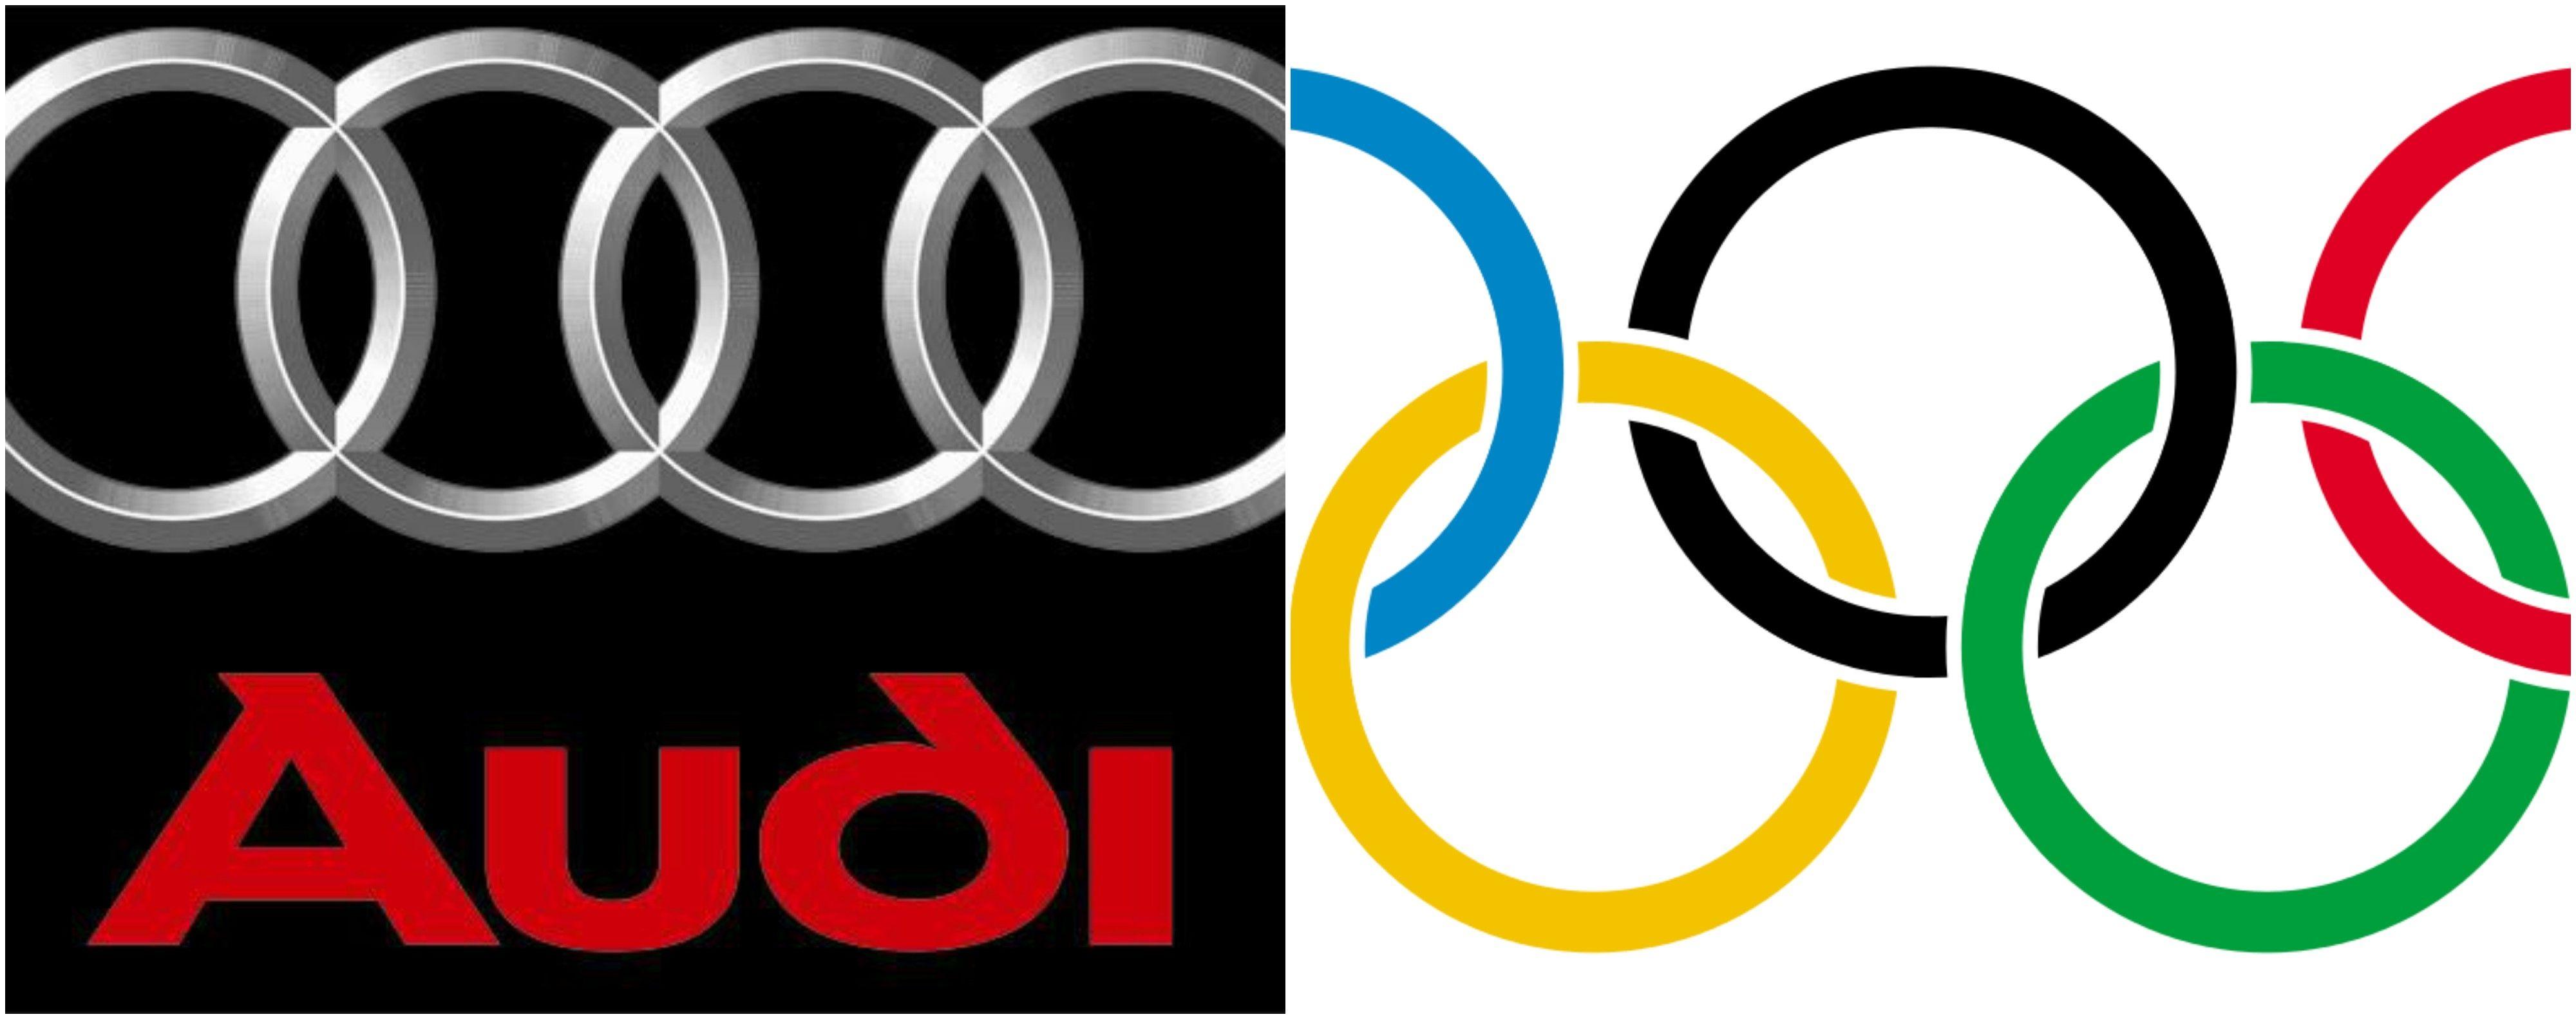 4 Rings Logo - meaning of the rings in the audi logo